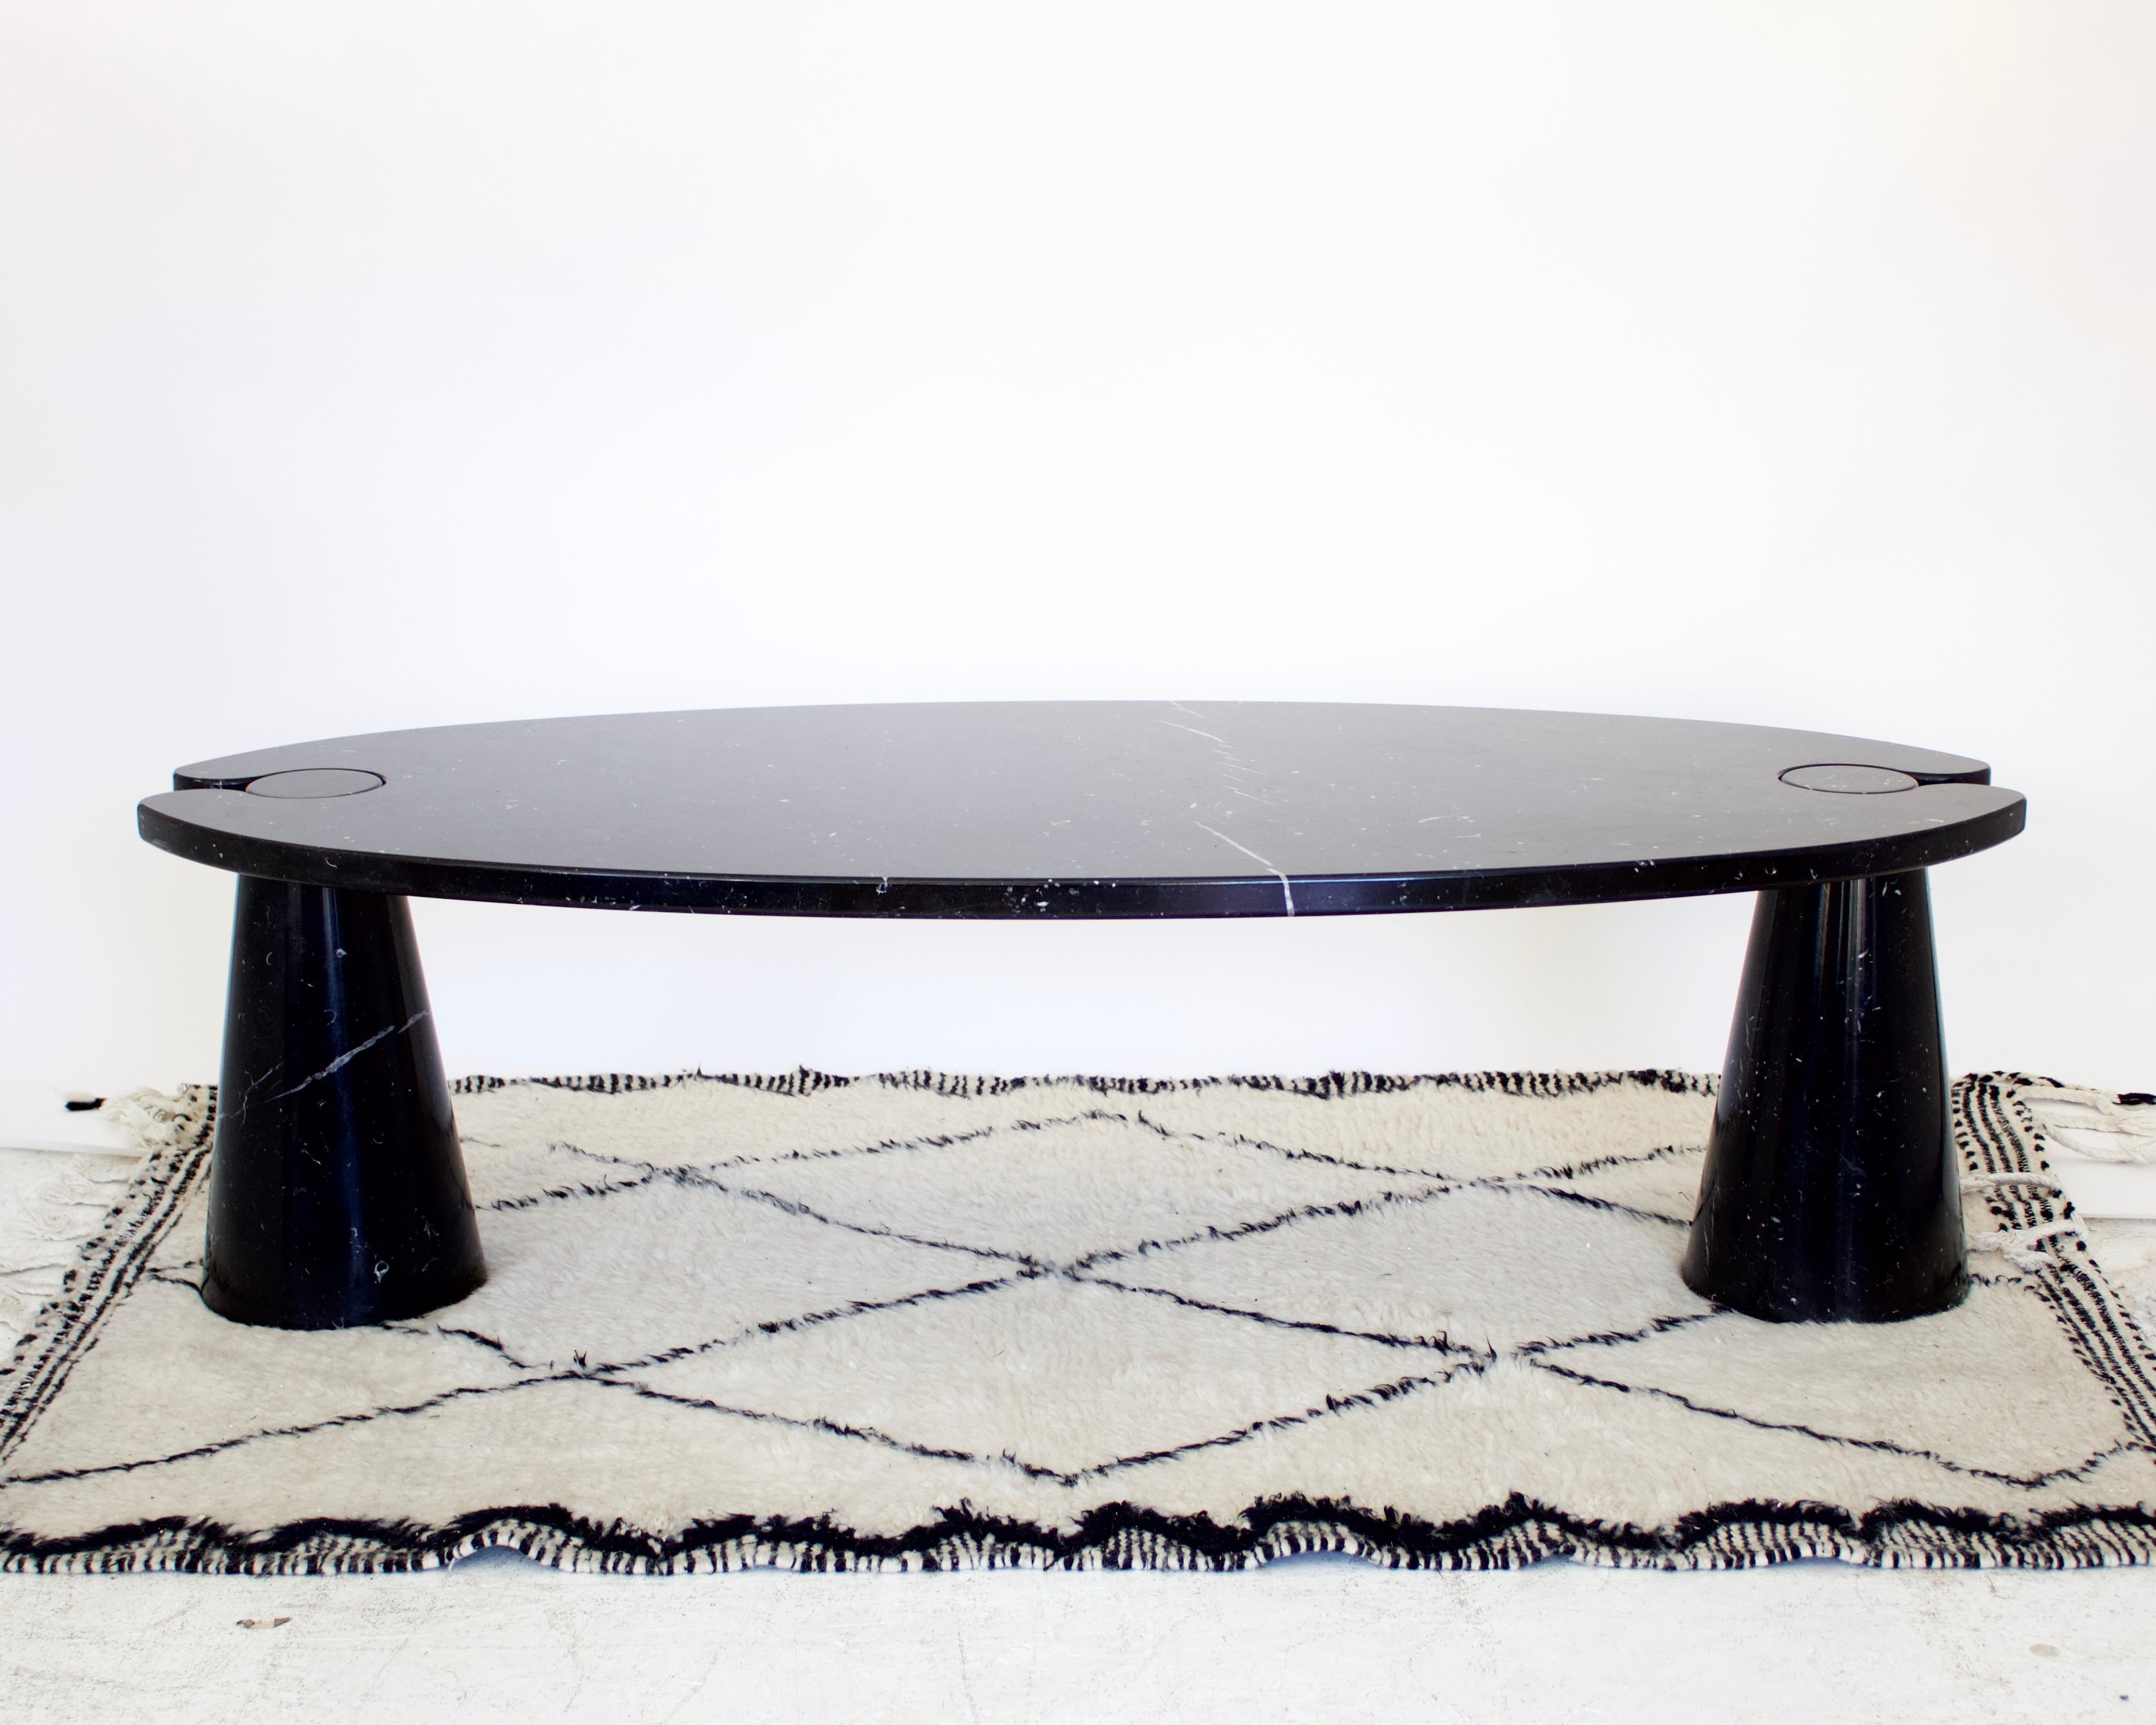 Angelo Mangiarotti Eros black Marquina marble coffee table. 
Oval shape, two pedestals supporting one oval top. Classic Mangiarotti and would lovely in any home, modern or transitional. 
The unique architectural aspects of Angelo Mangiarotti make